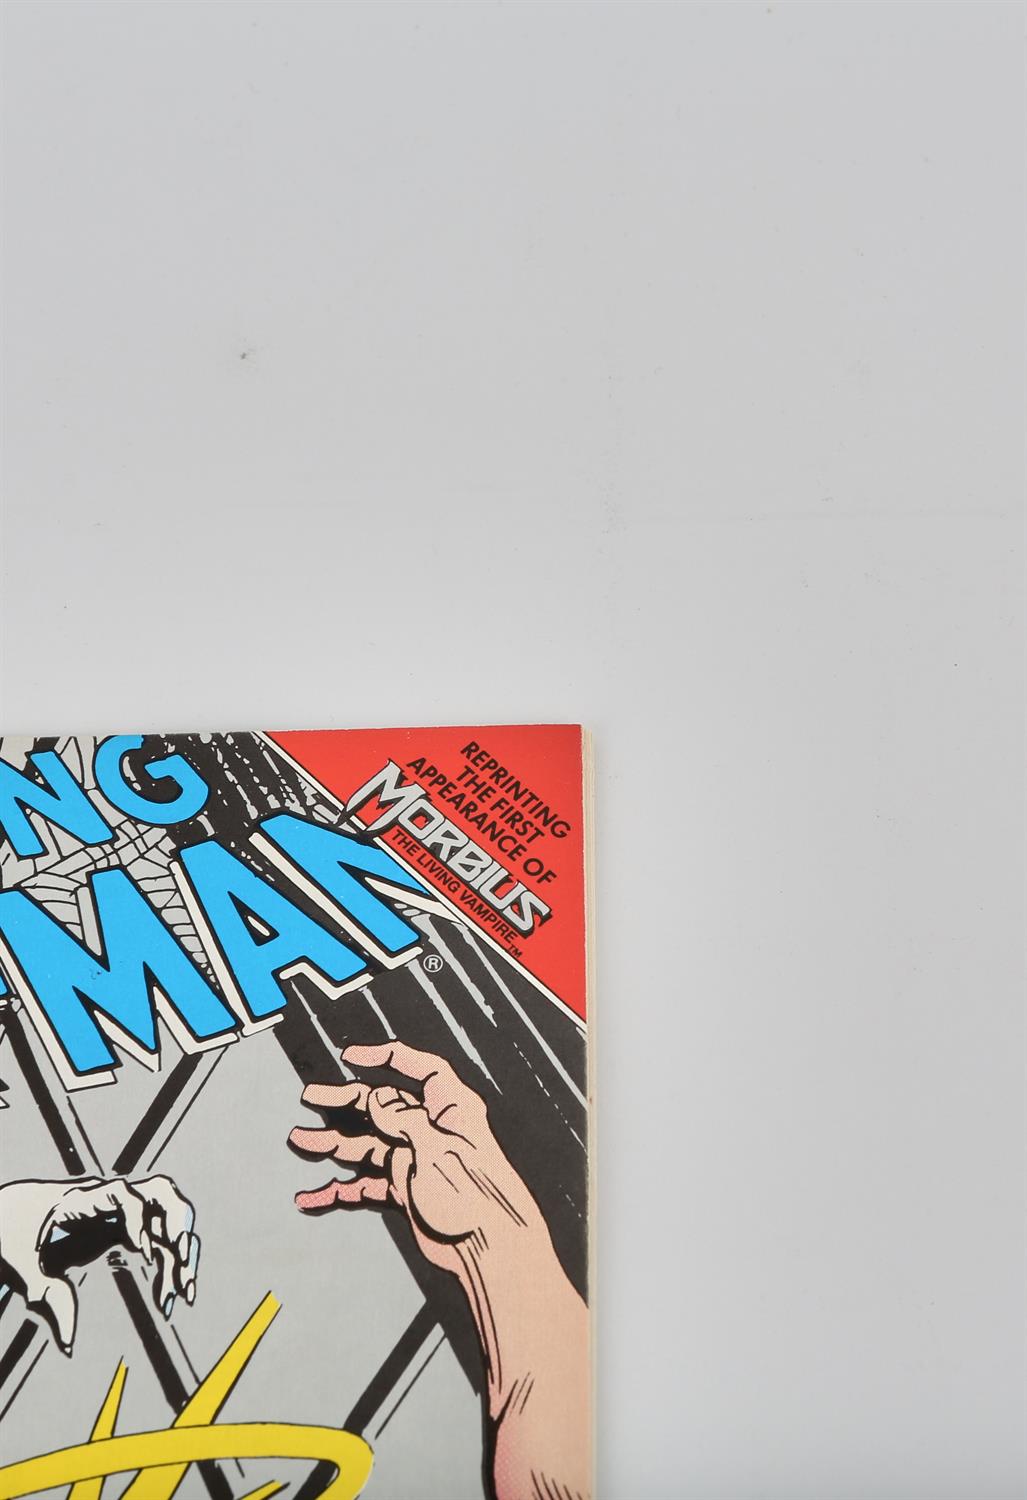 Marvel Comics: The Amazing Spider-Man No. 101 featuring the 1st appearance of Morbius (1992). - Image 6 of 10